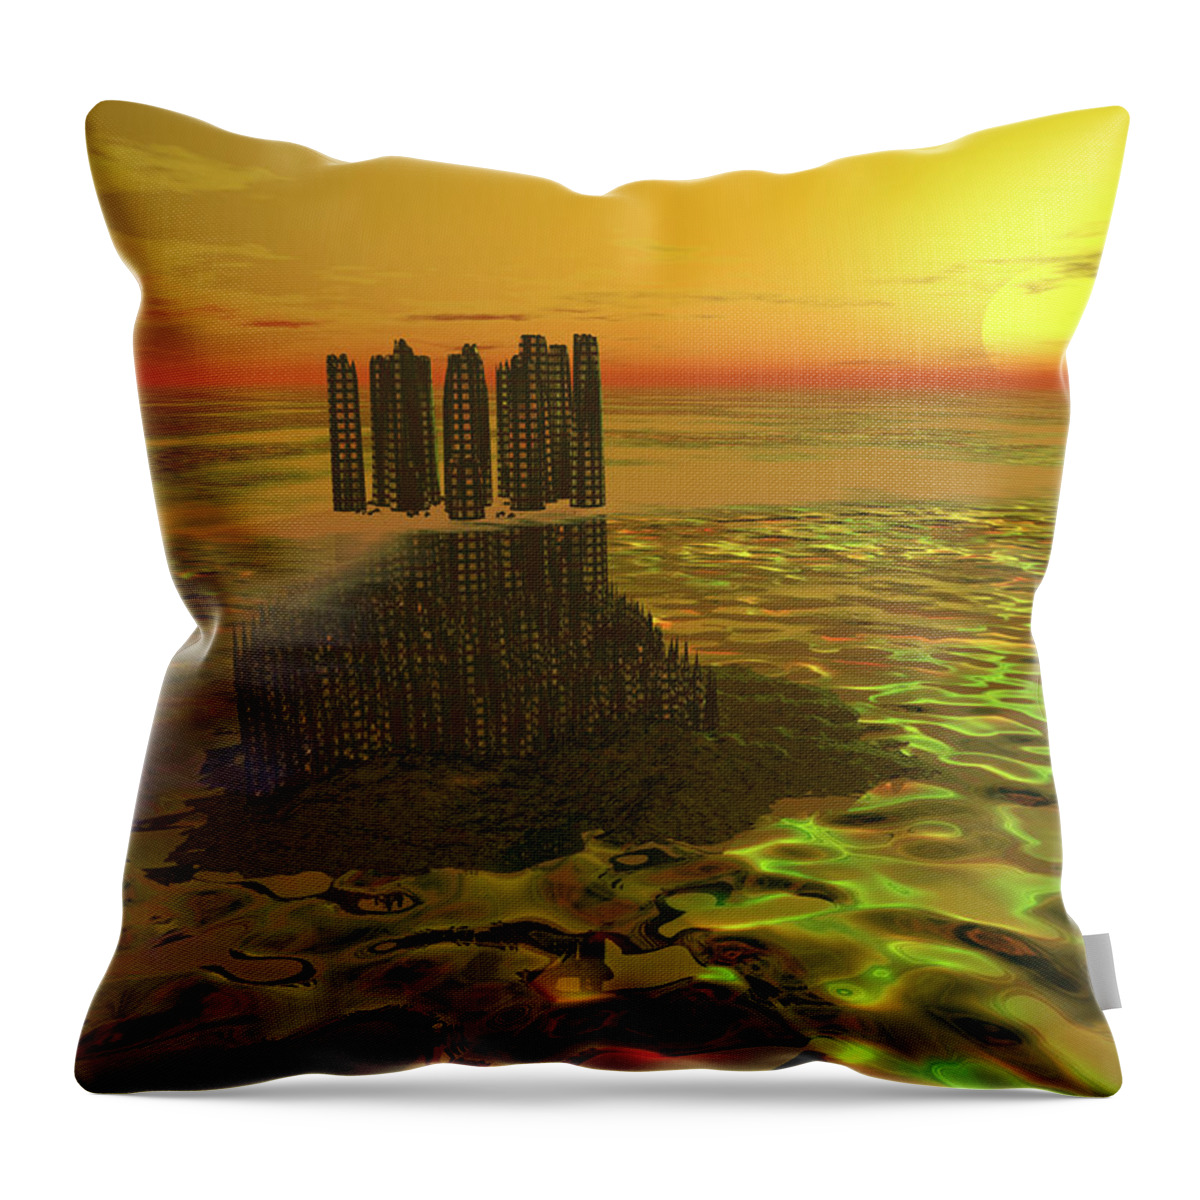 Ancient Throw Pillow featuring the digital art Old City by Bernie Sirelson